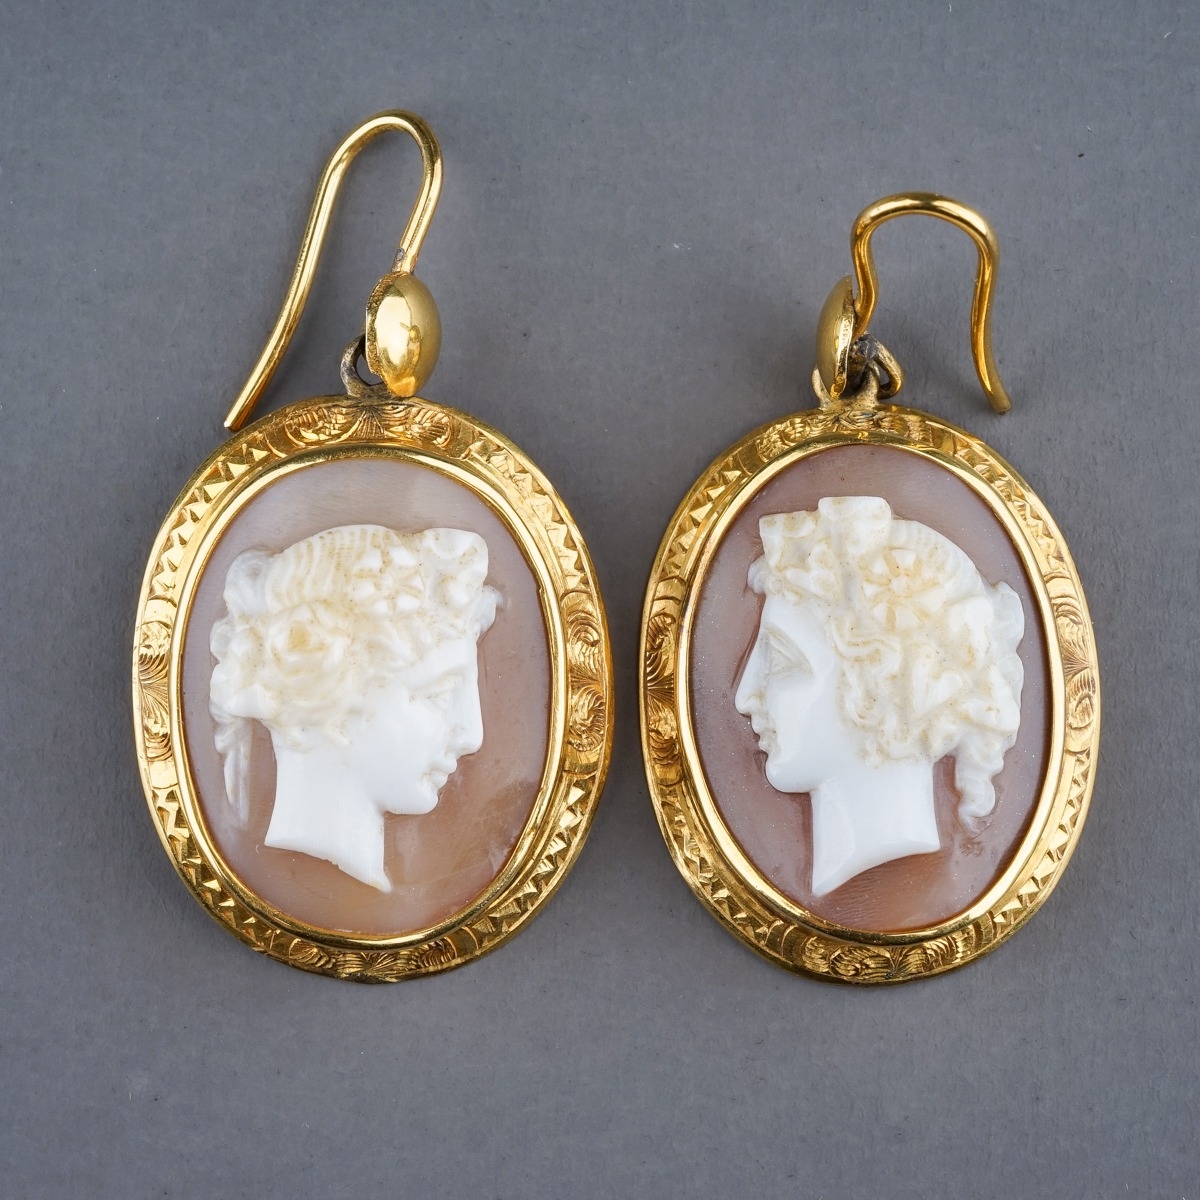 A pair of 19th century yellow gold and cameo earrings, set with shell cameos carved depicting